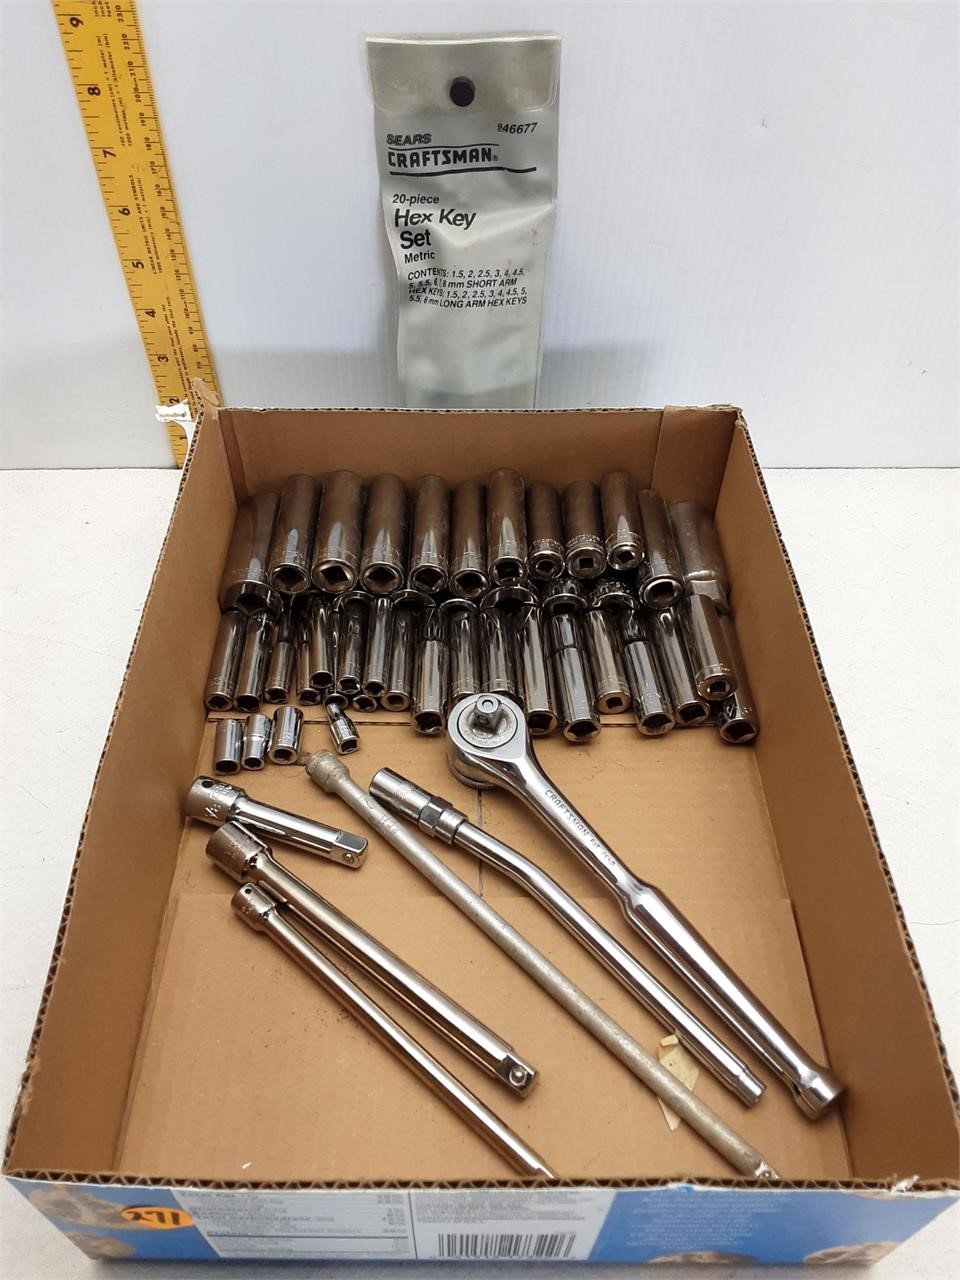 CRAFTSMAN 1/4" & 3/8" MISC. SOCKETS ALLEN WRENCHES